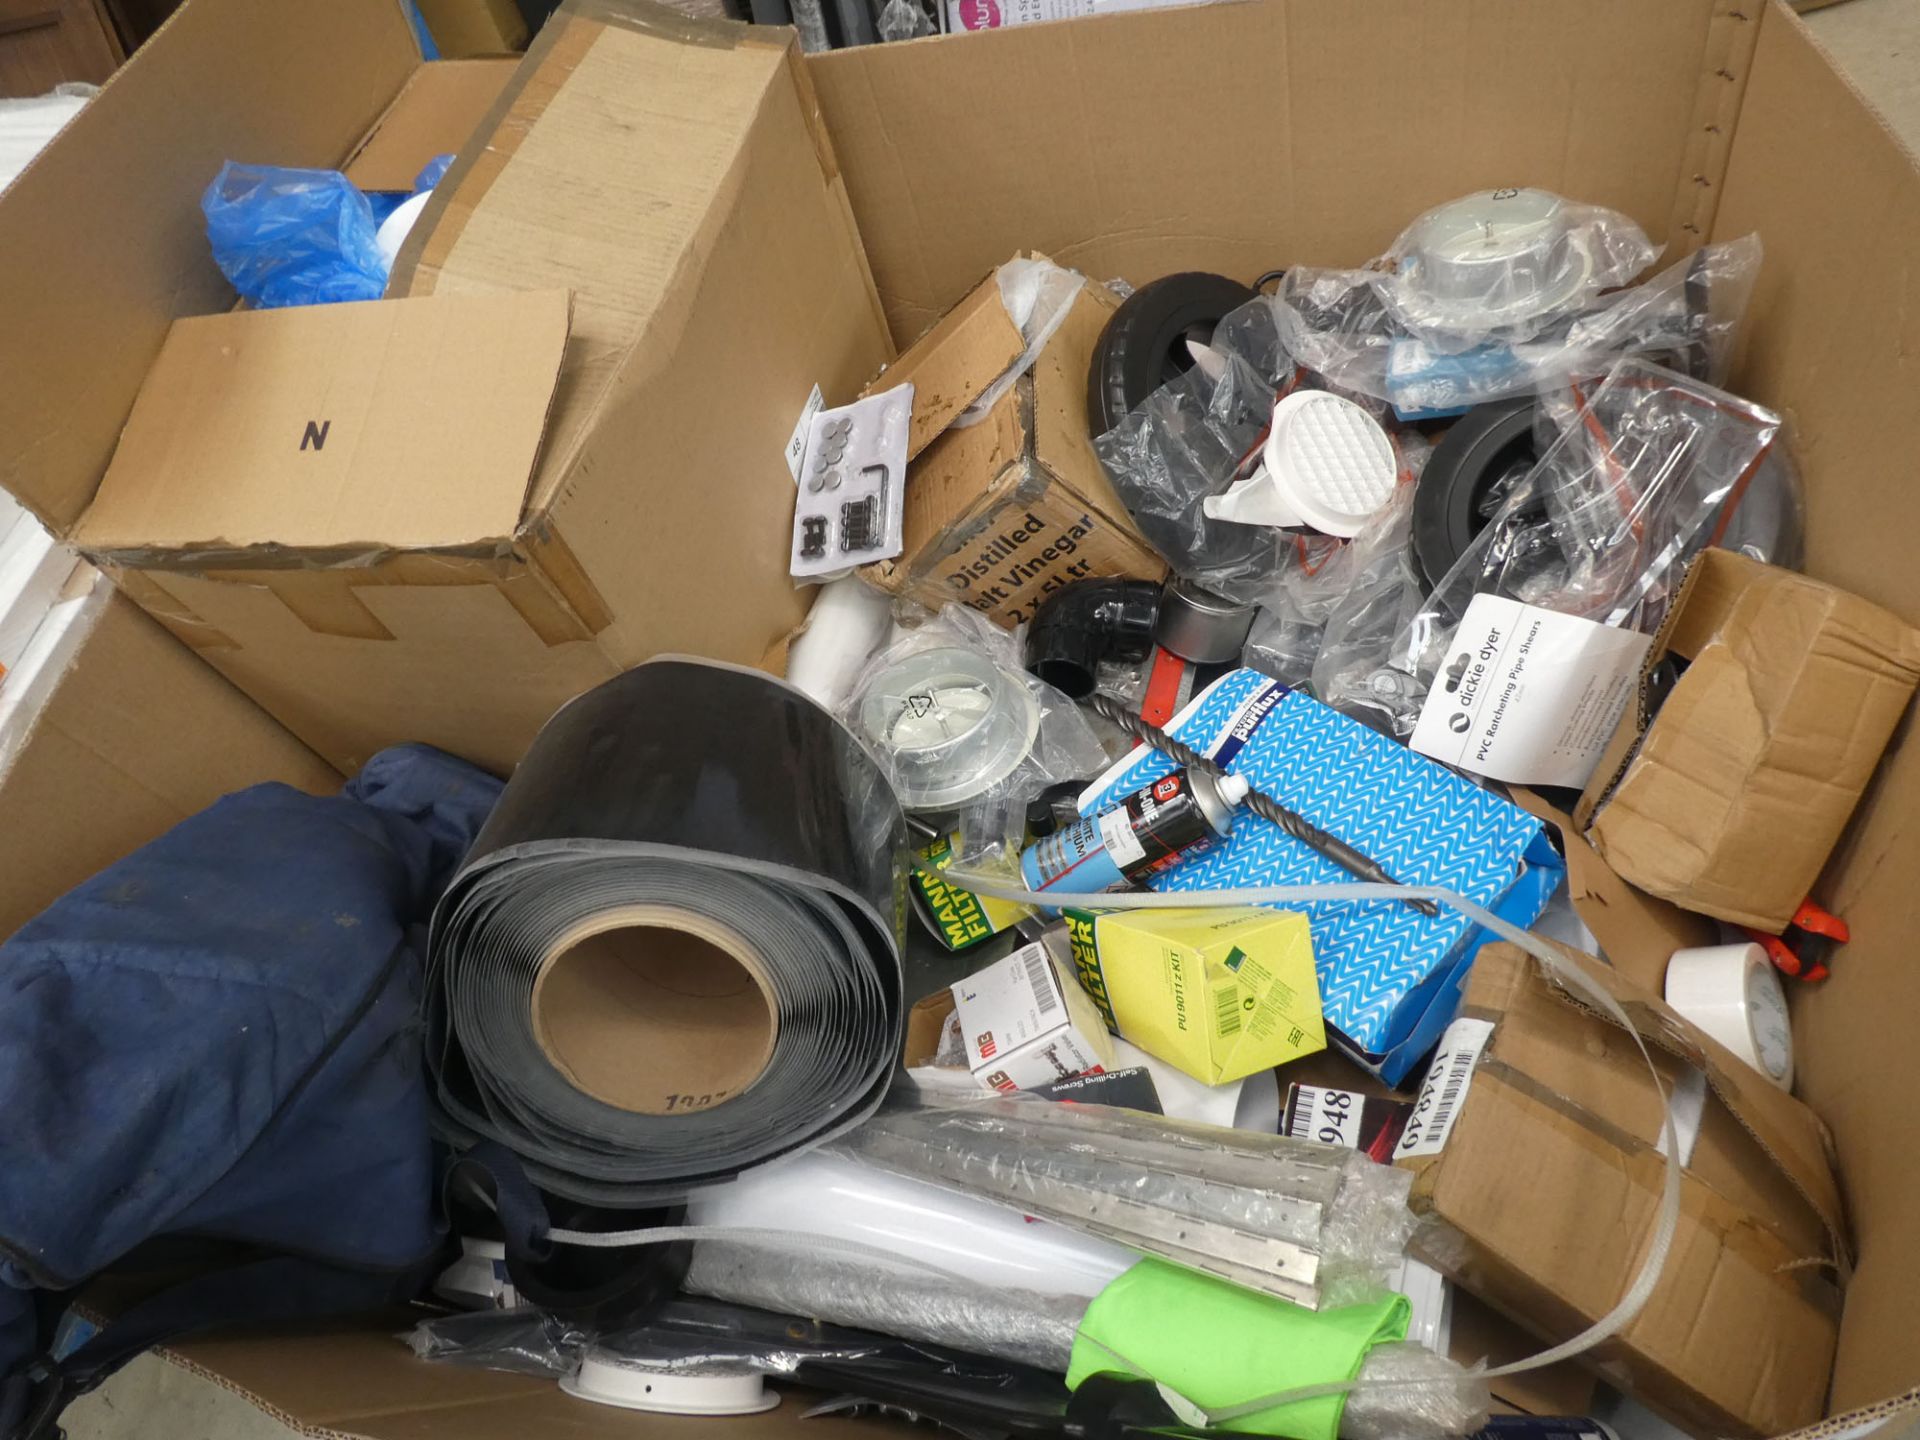 Pallet of items to inc. wheels, pipes, filters, tape, drill bits, silicone, grease, etc